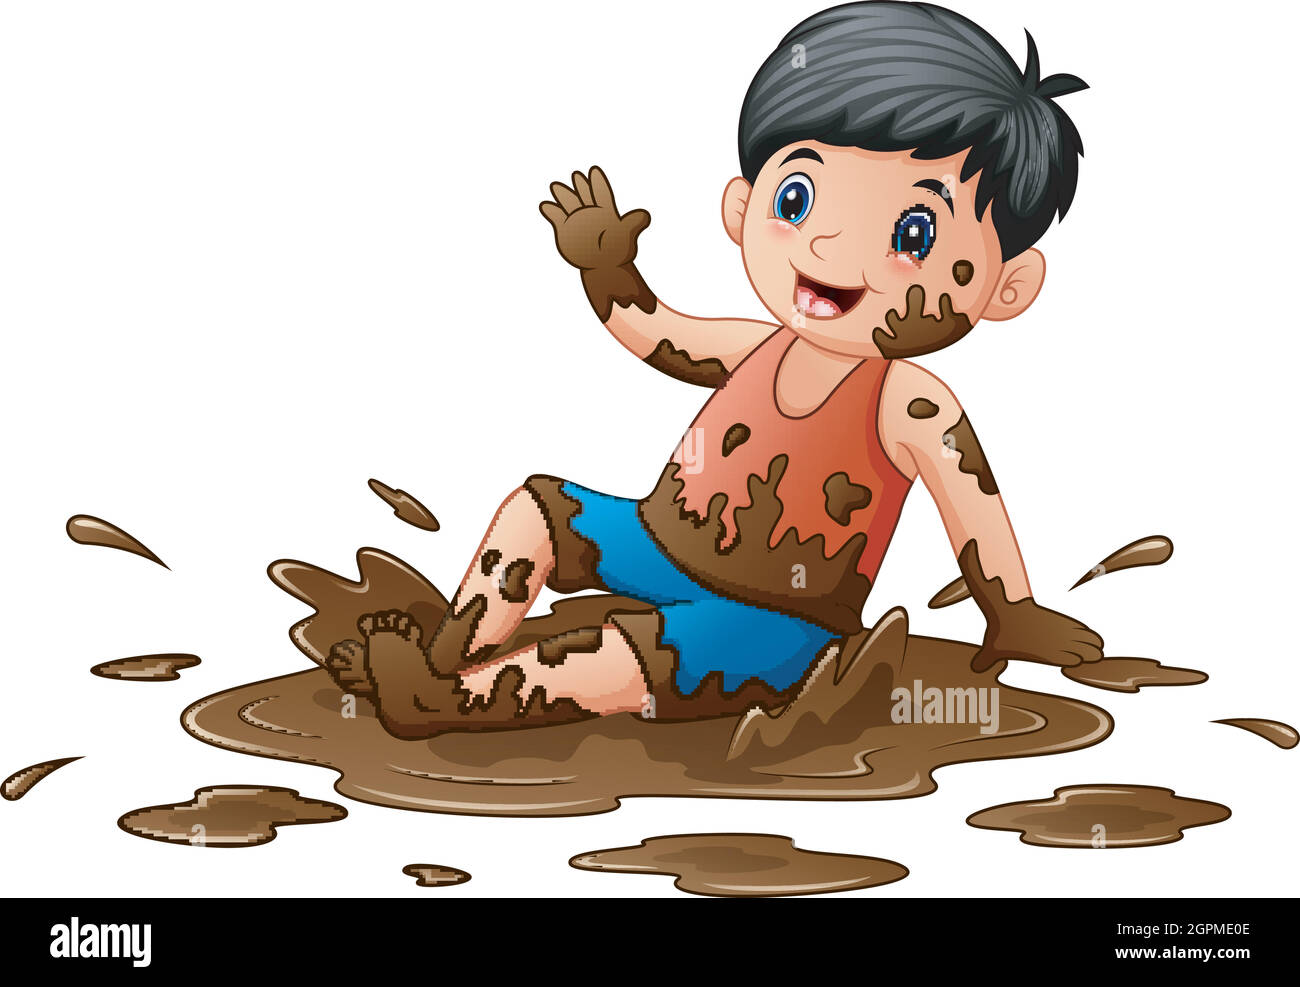 Vector illustration of Little boy playing in the mud Stock Vector